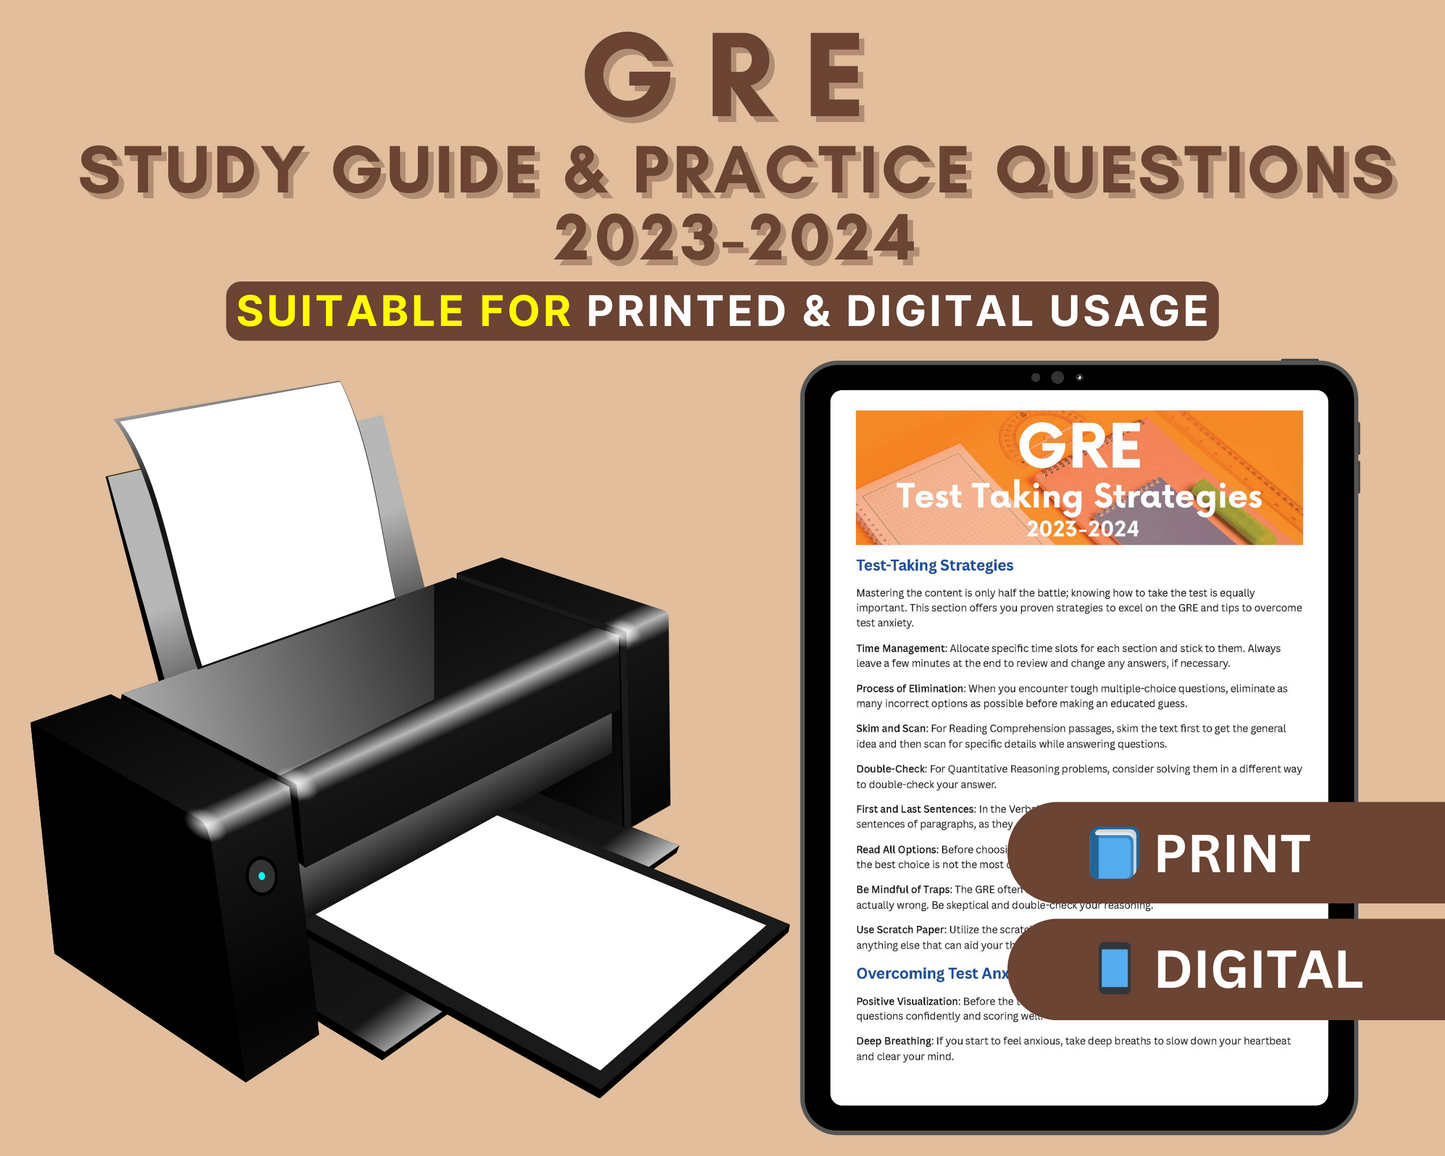 GRE Exam Study Guide 2023-2024 by Test Treasure Publication: Master Analytical Writing, Verbal & Quantitative Reasoning